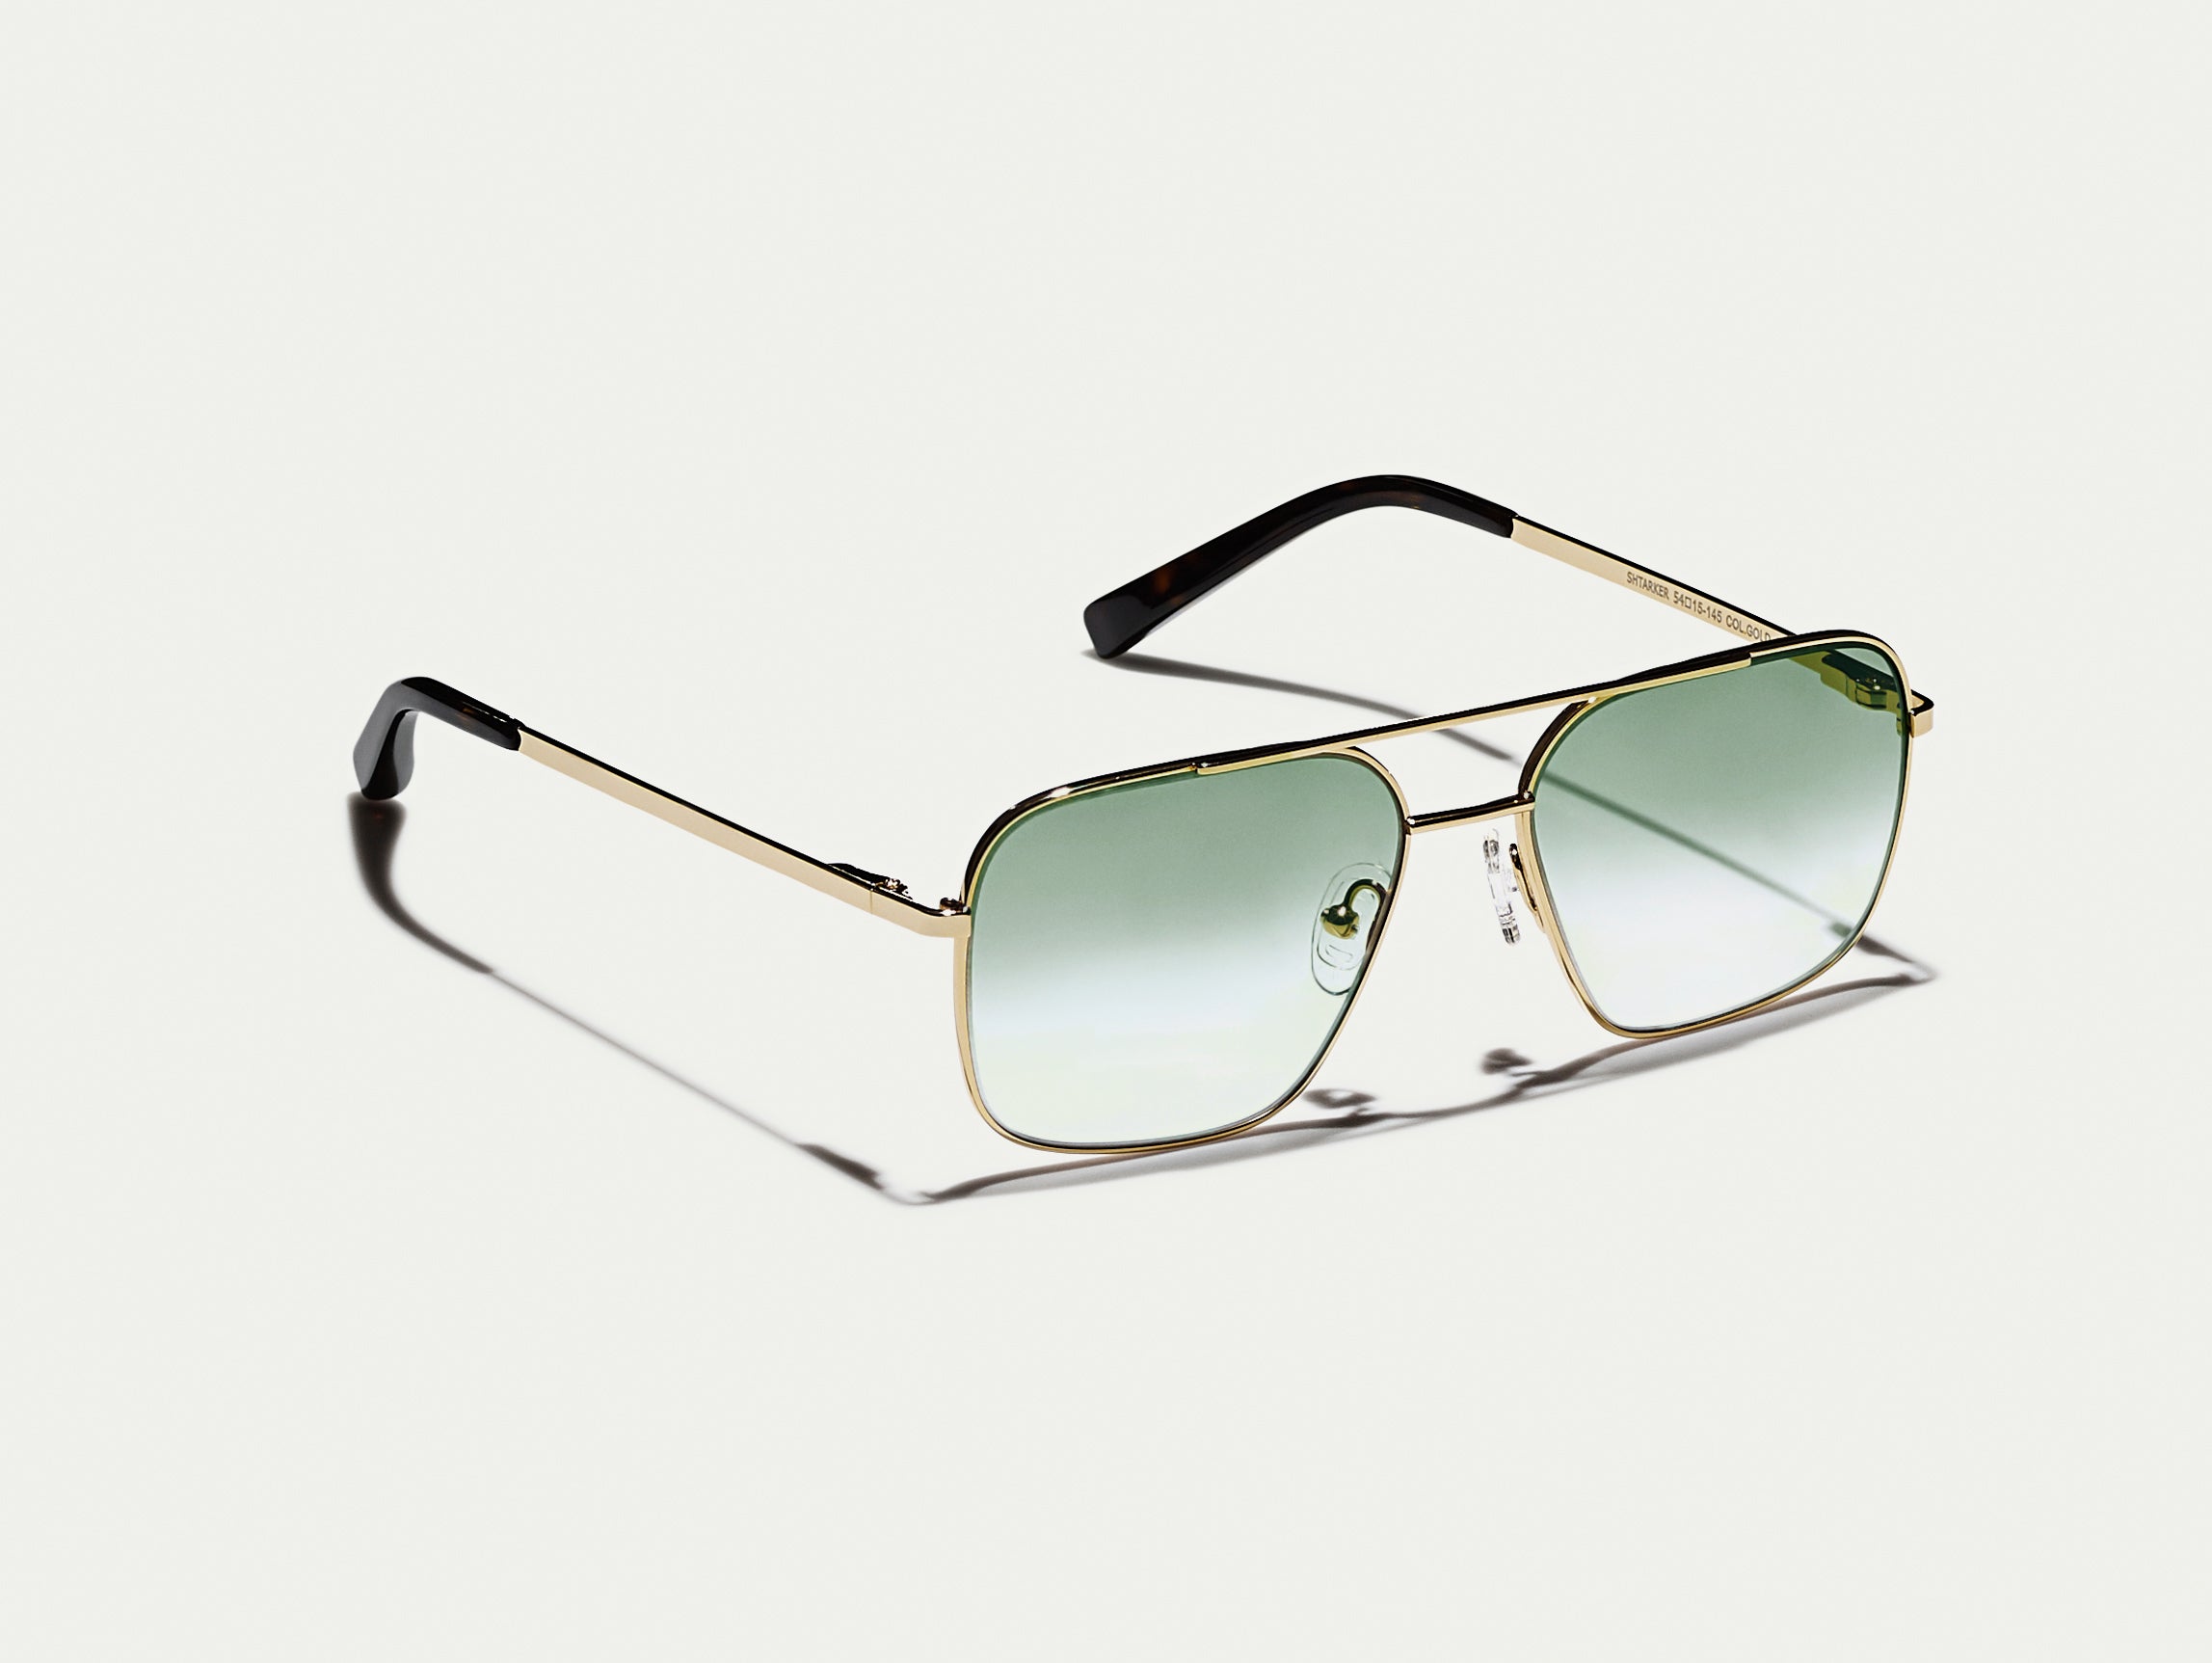 #color_g-15 fade | The SHTARKER in Gold with G-15 Fade Tinted Lenses